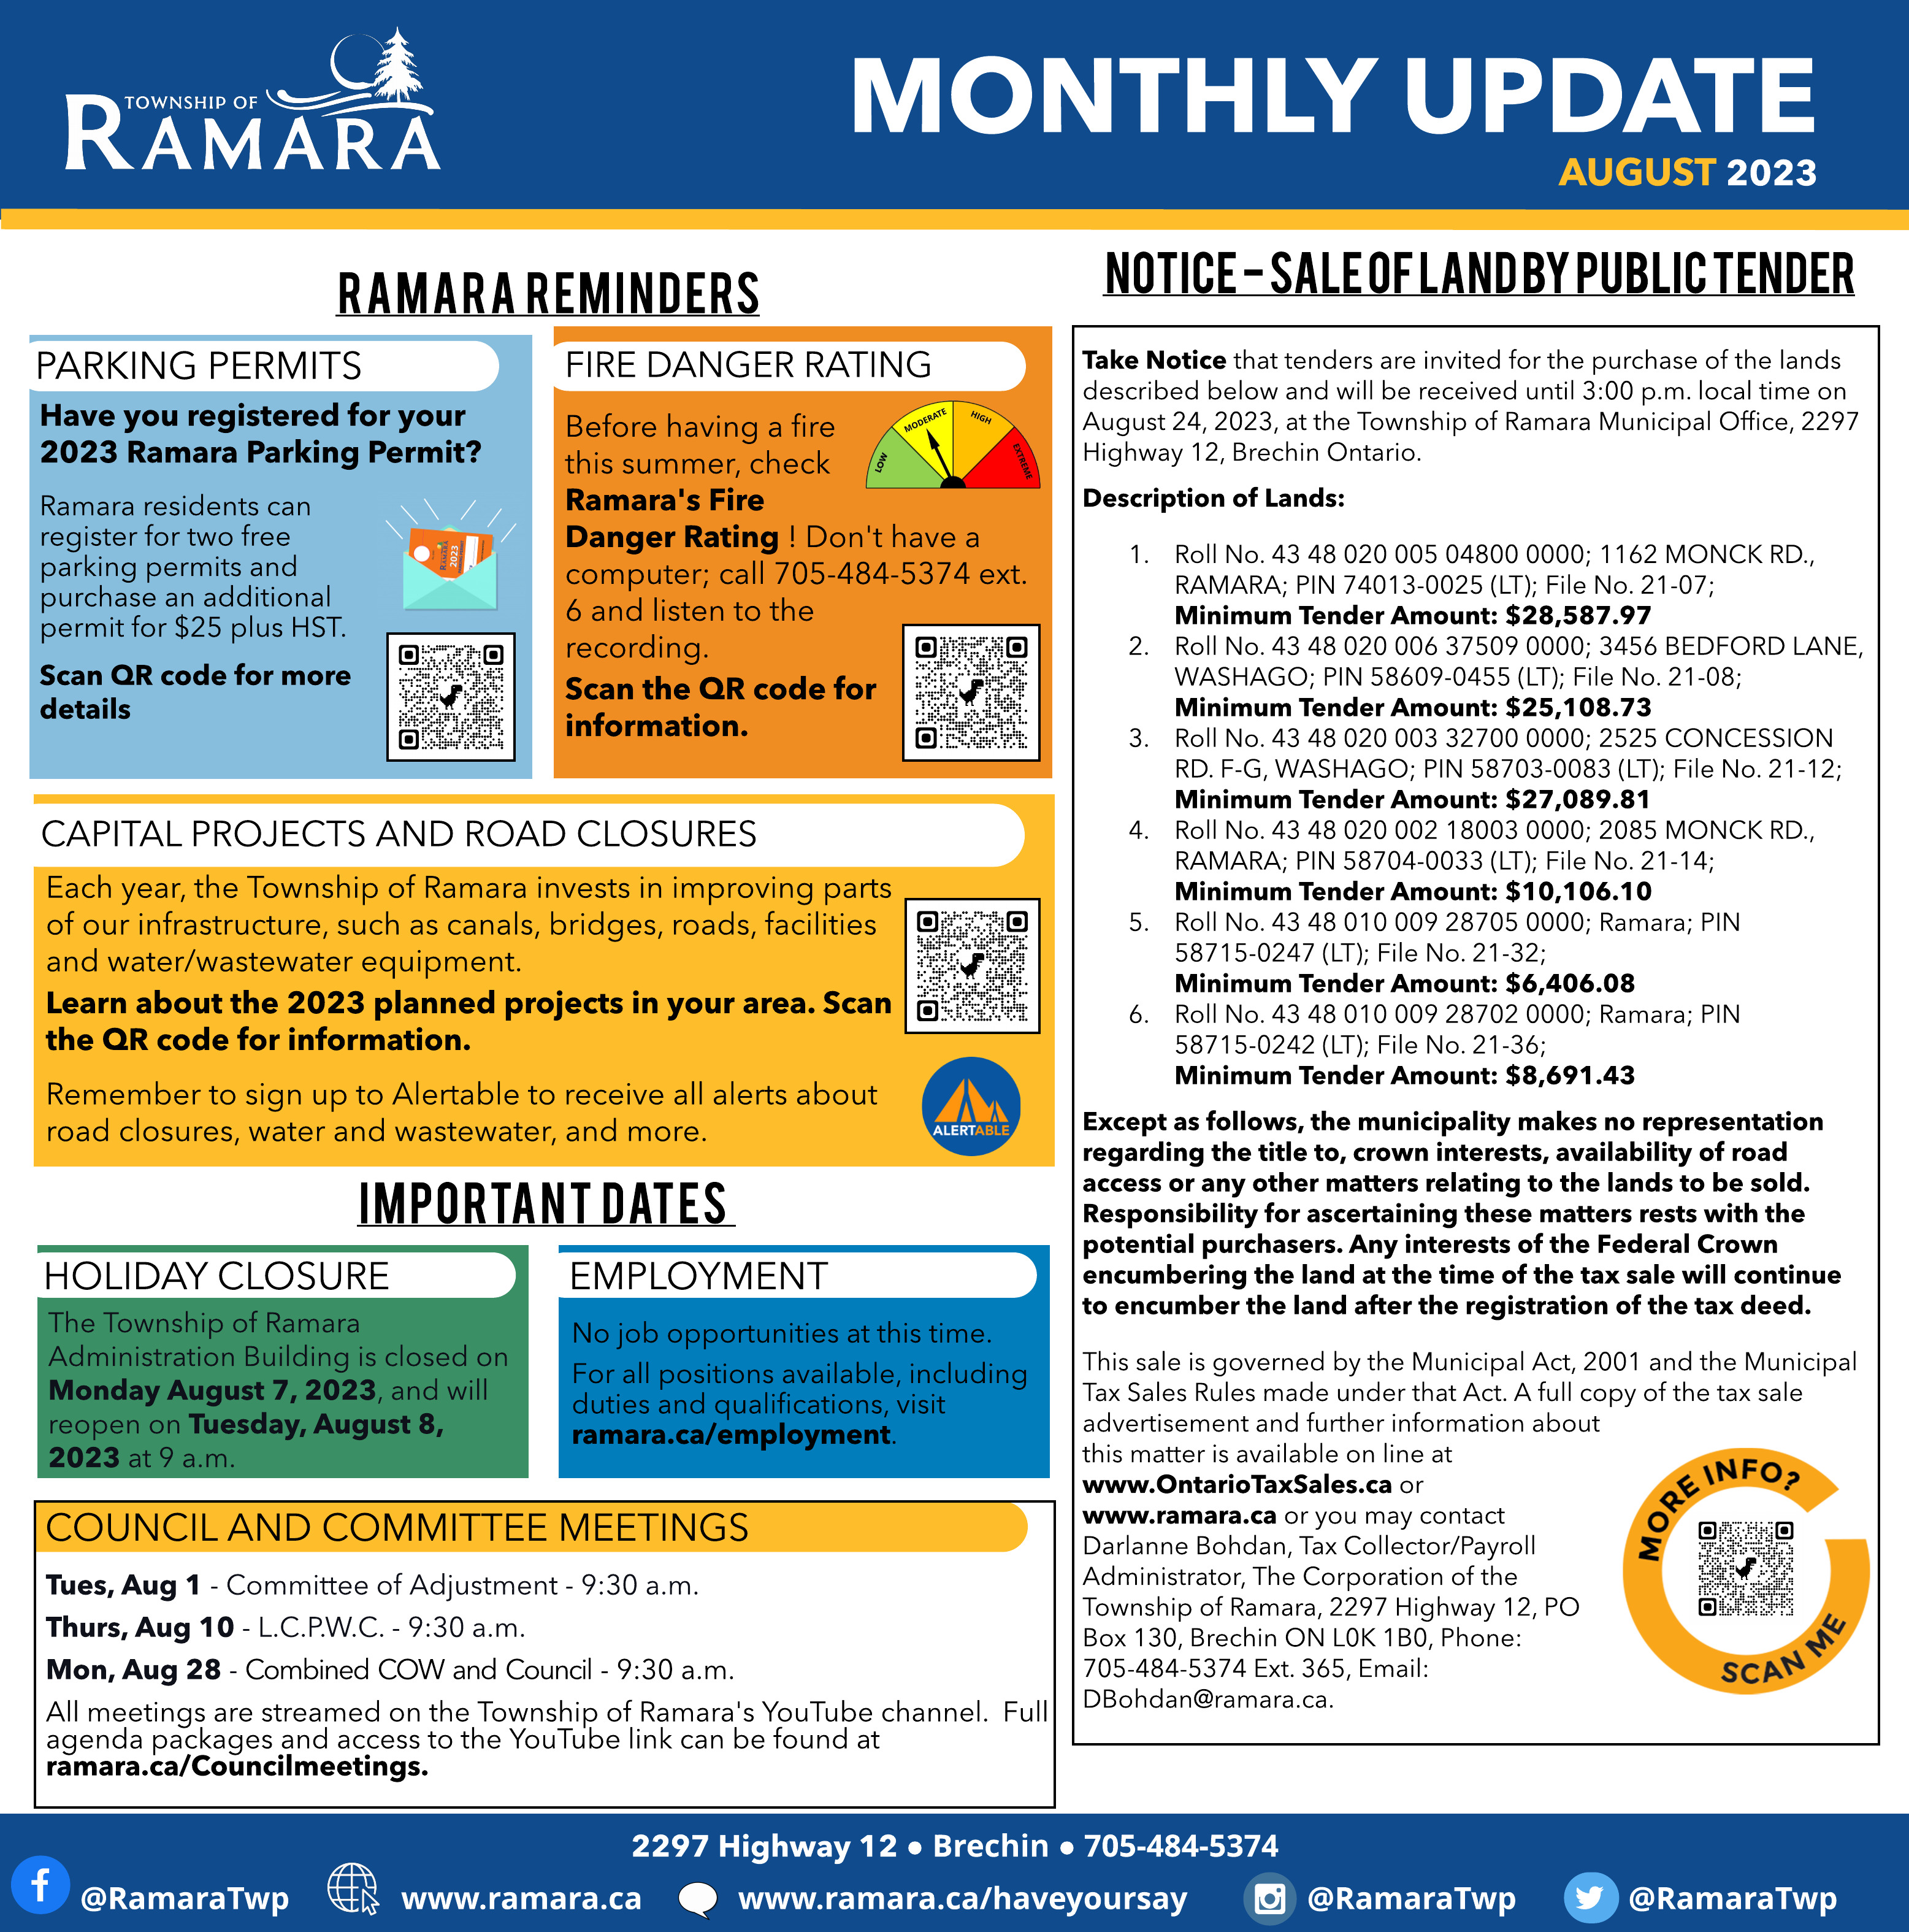 August edition of the Ramara Bulletin that lists all the news and important updates for Ramara Township. 